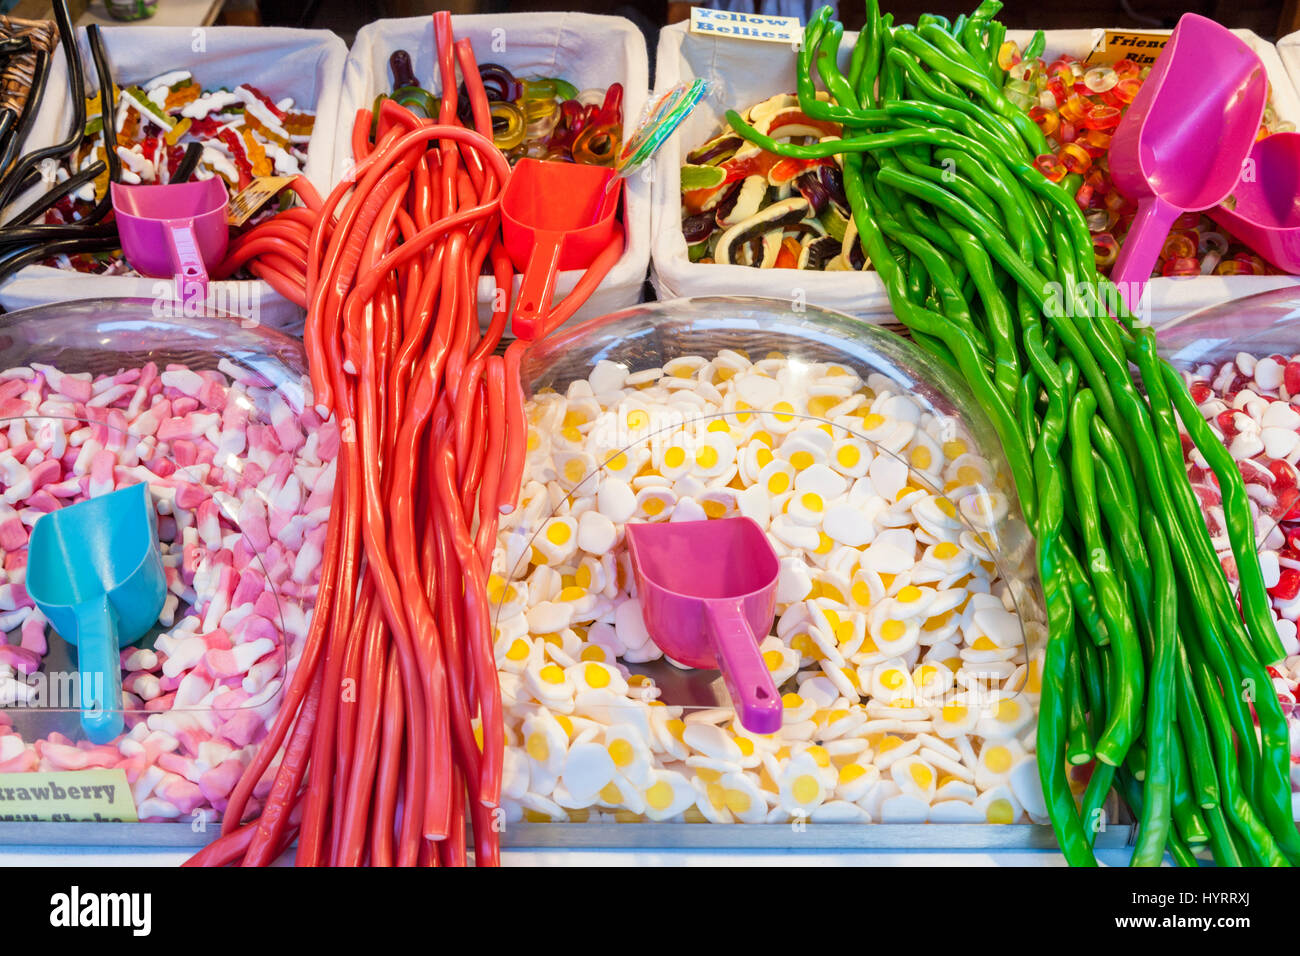 https://c8.alamy.com/comp/HYRRXJ/sweets-and-liquorice-strings-at-a-pick-and-mix-sweet-stall-england-HYRRXJ.jpg